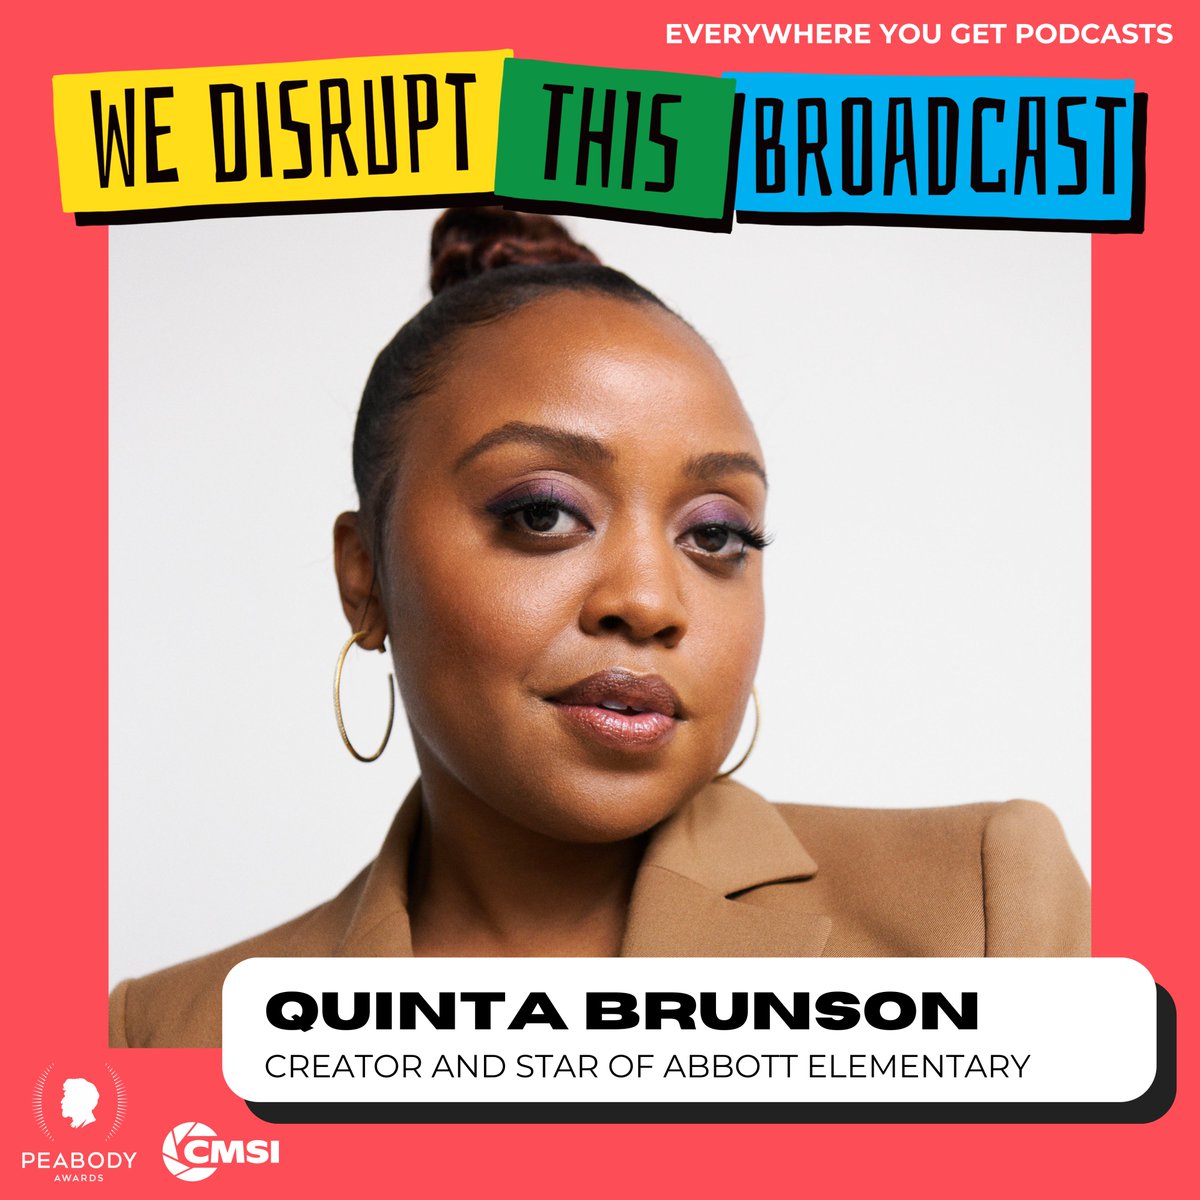 I could be cheeky and say it's cool to have Abbott Elementary star Quinta Brunson open for me on the Peabody awards' We Disrupt This Broadcast podcast. But seriously, I'm honored to speak on the show for the last 10 minutes of this awesome pod. LISTEN: loom.ly/Gfis_B4